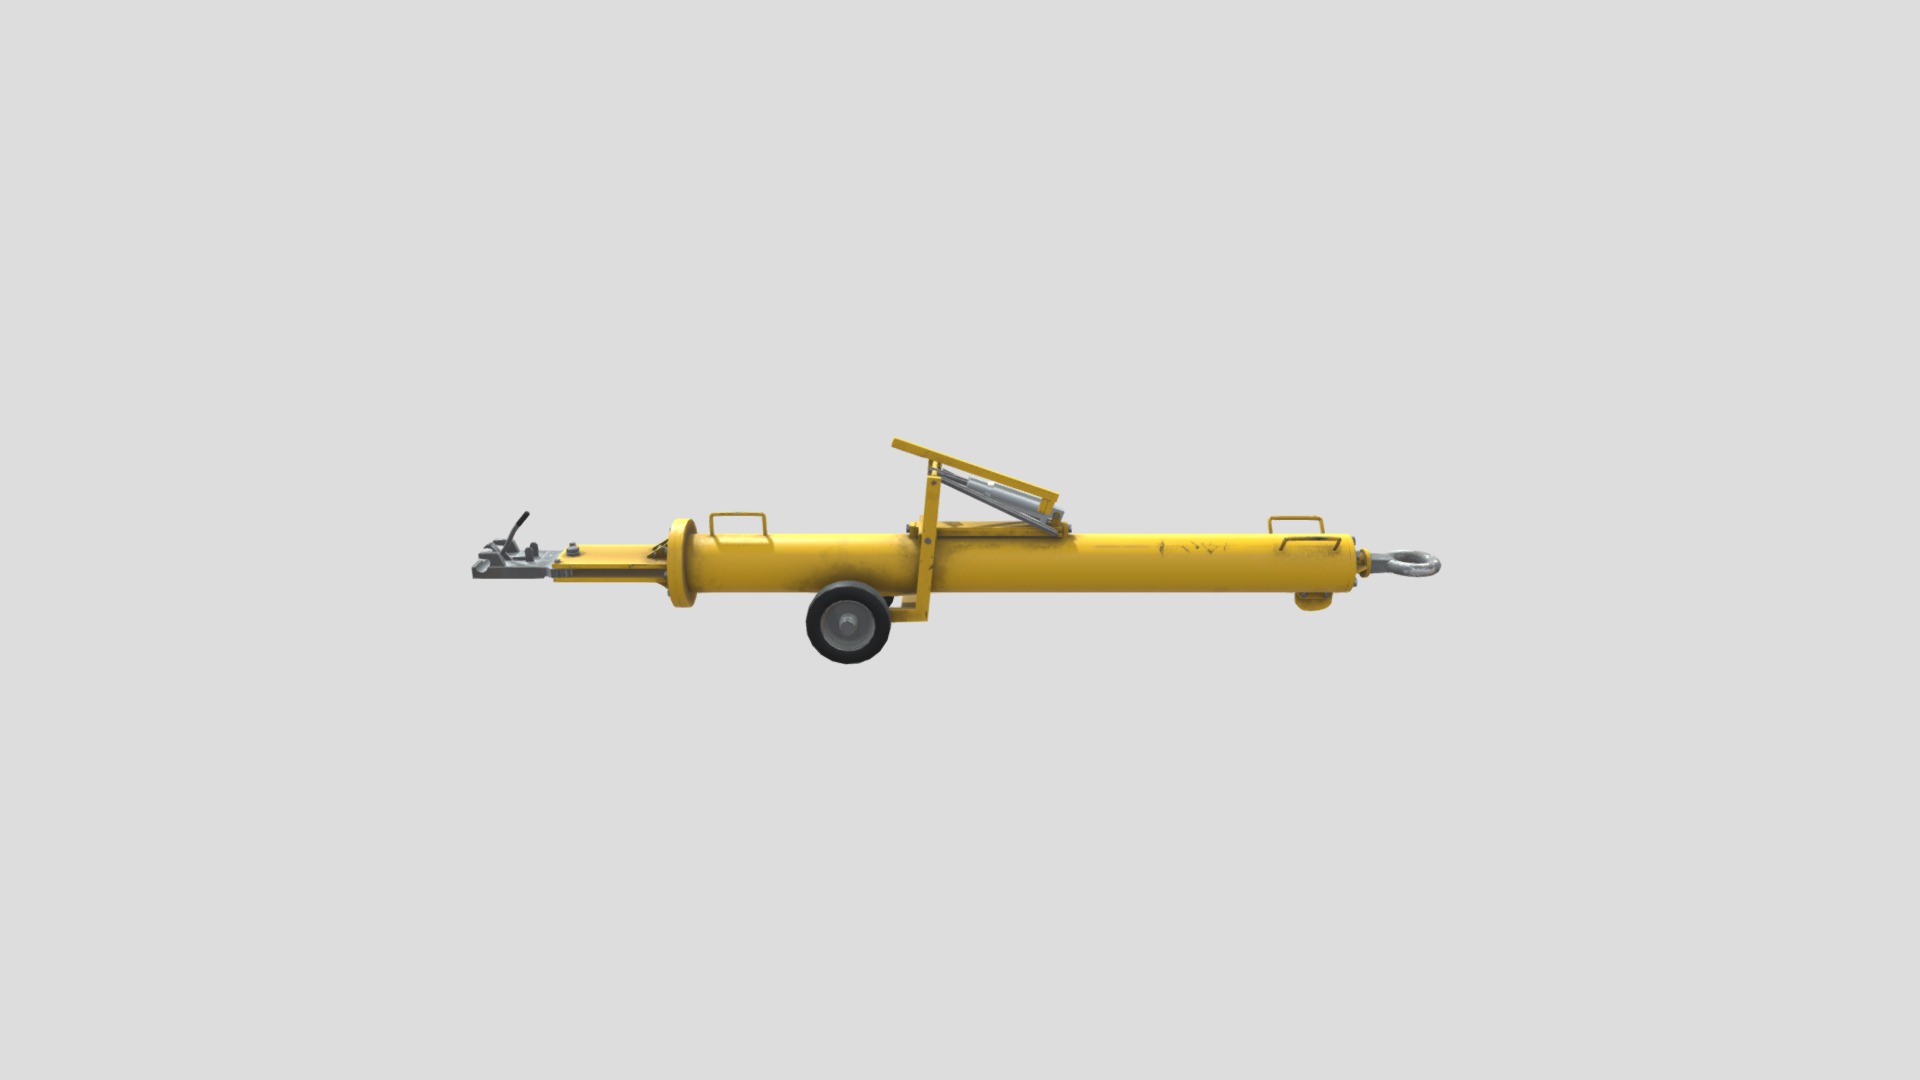 3D model Aircraft Pushback Towbar - This is a 3D model of the Aircraft Pushback Towbar. The 3D model is about a yellow airplane in the sky.